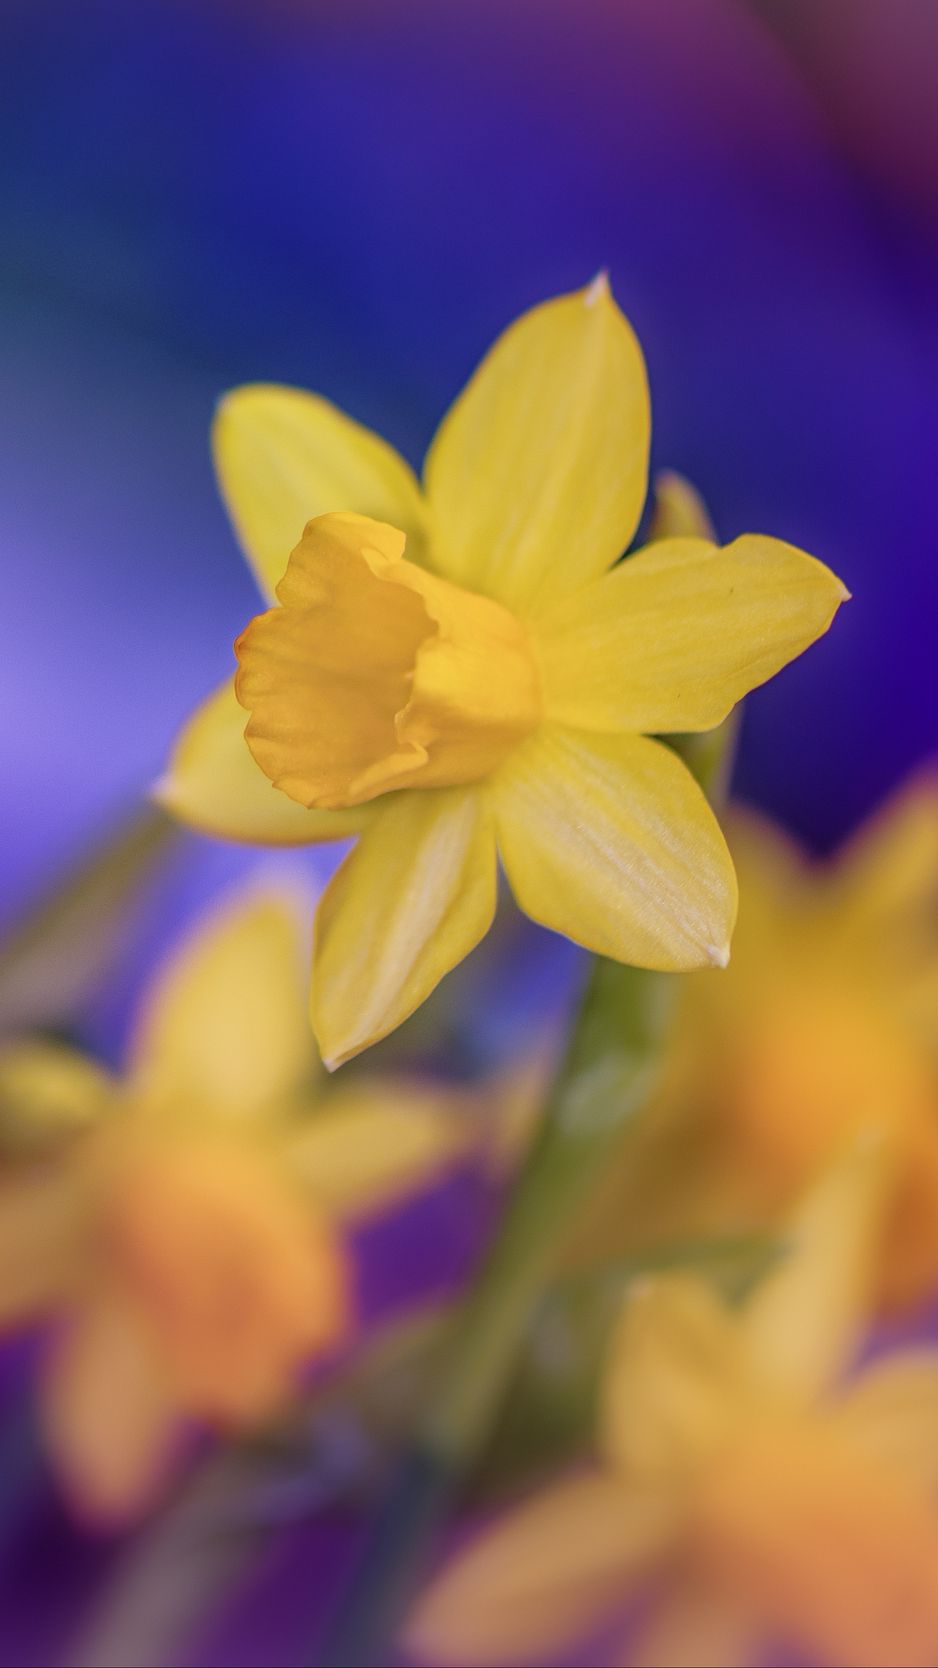 112800 Daffodil Stock Photos Pictures  RoyaltyFree Images  iStock   Daffodils field Daffodils in vase Spring